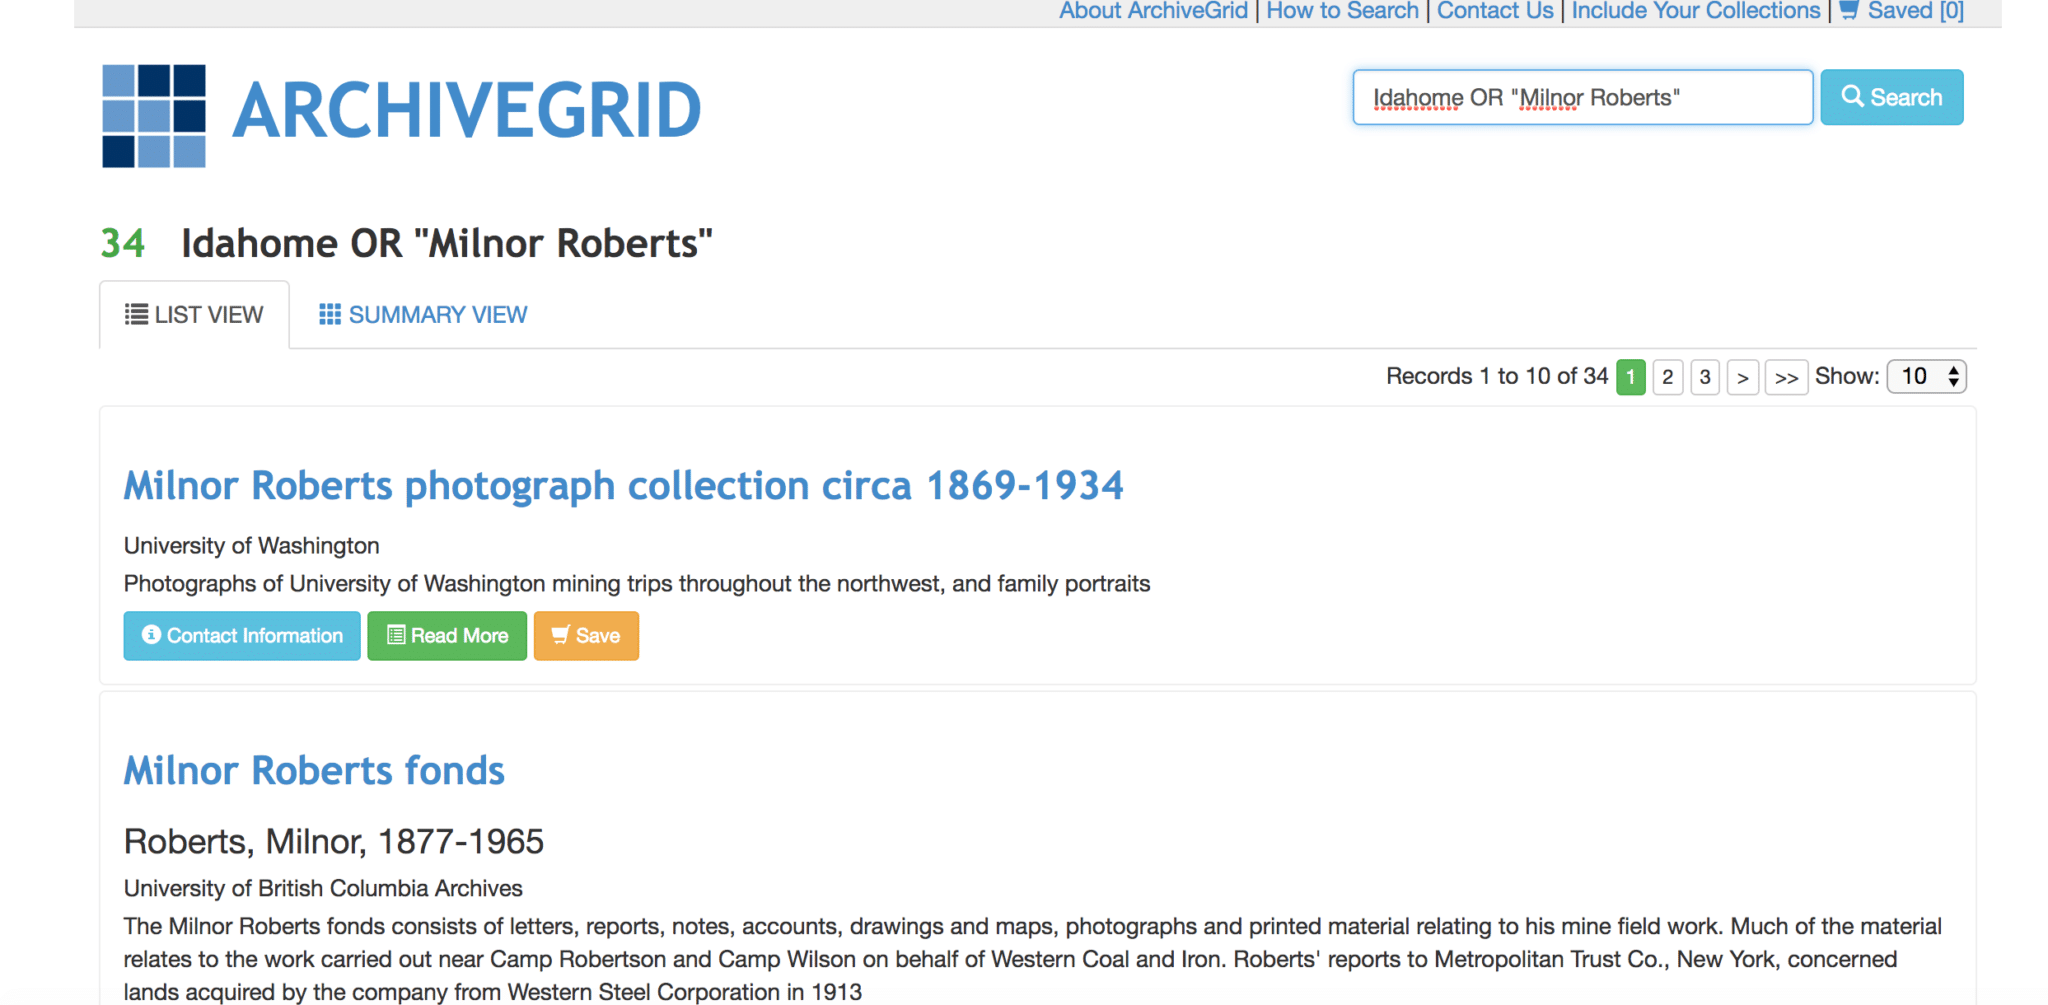 Search results on ArchiveGrid